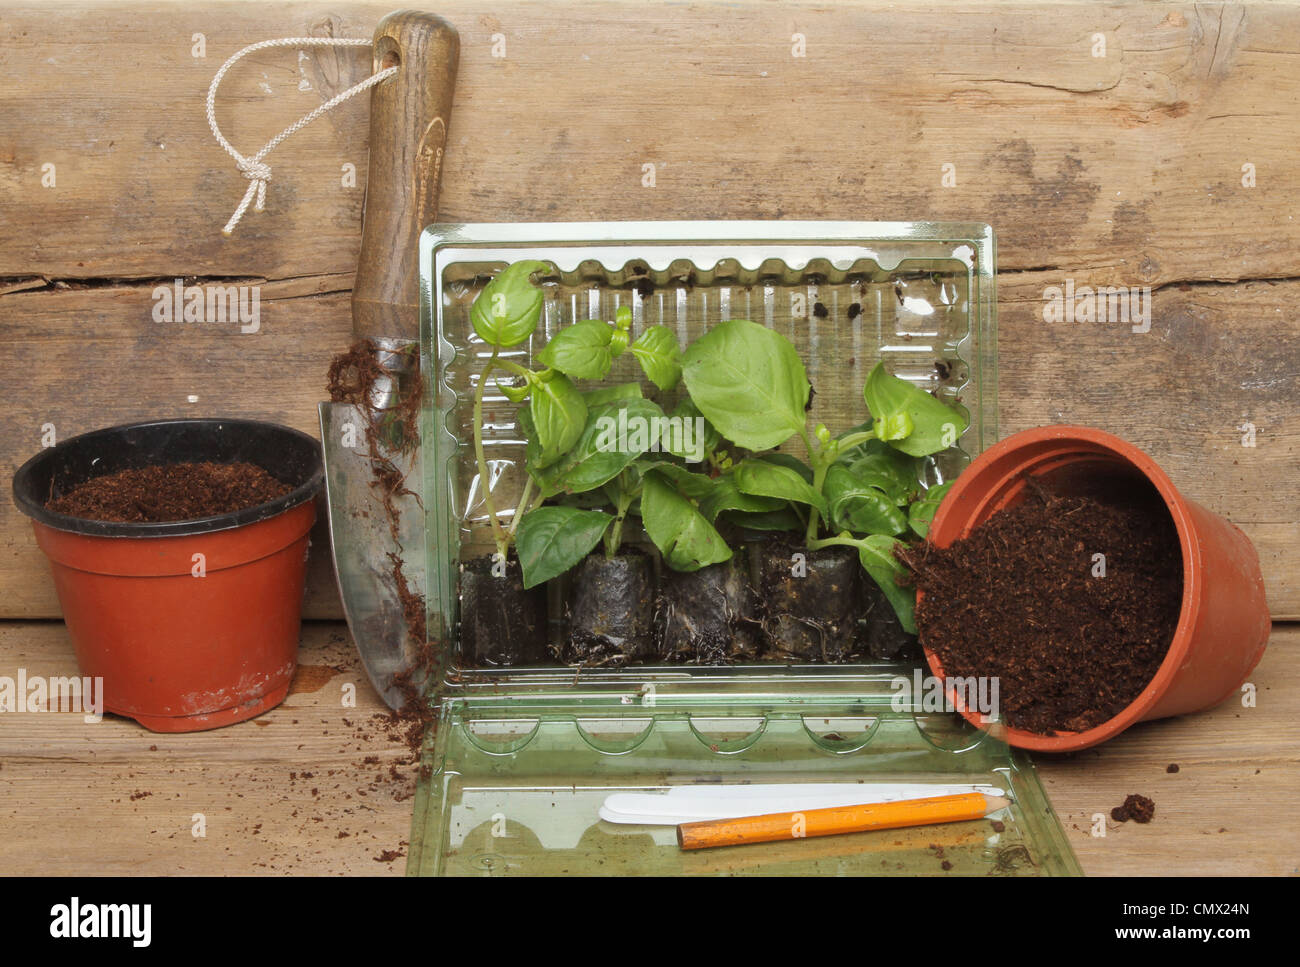 Plug plants in a plastic container with pots a garden trowel and labels on a wooden potting bench Stock Photo